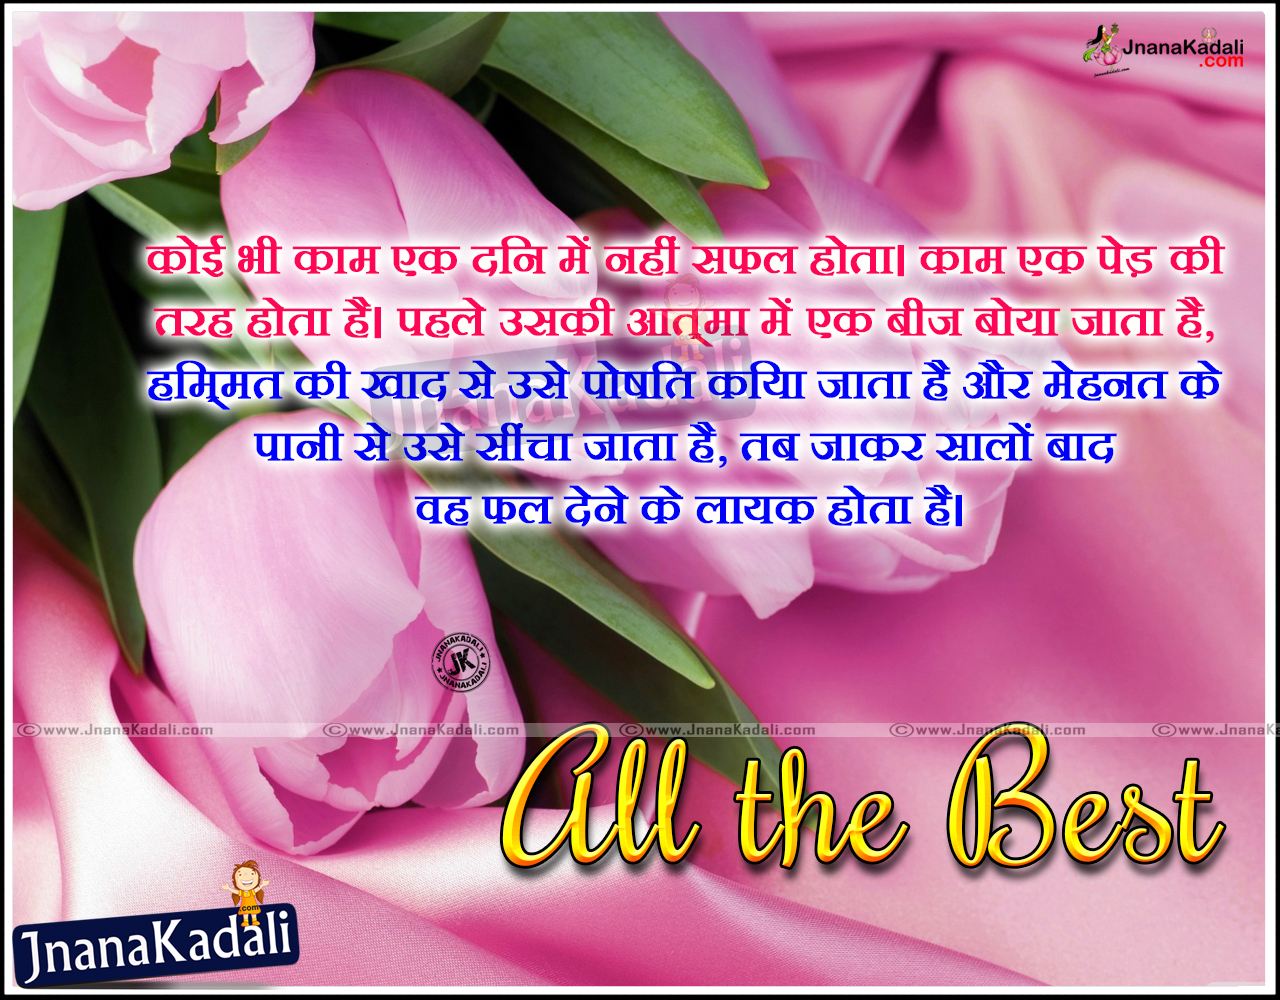 Here Is A Exam Quotes And Sms Online, Latest Hindi - All The Best Wishes In Hindi - HD Wallpaper 